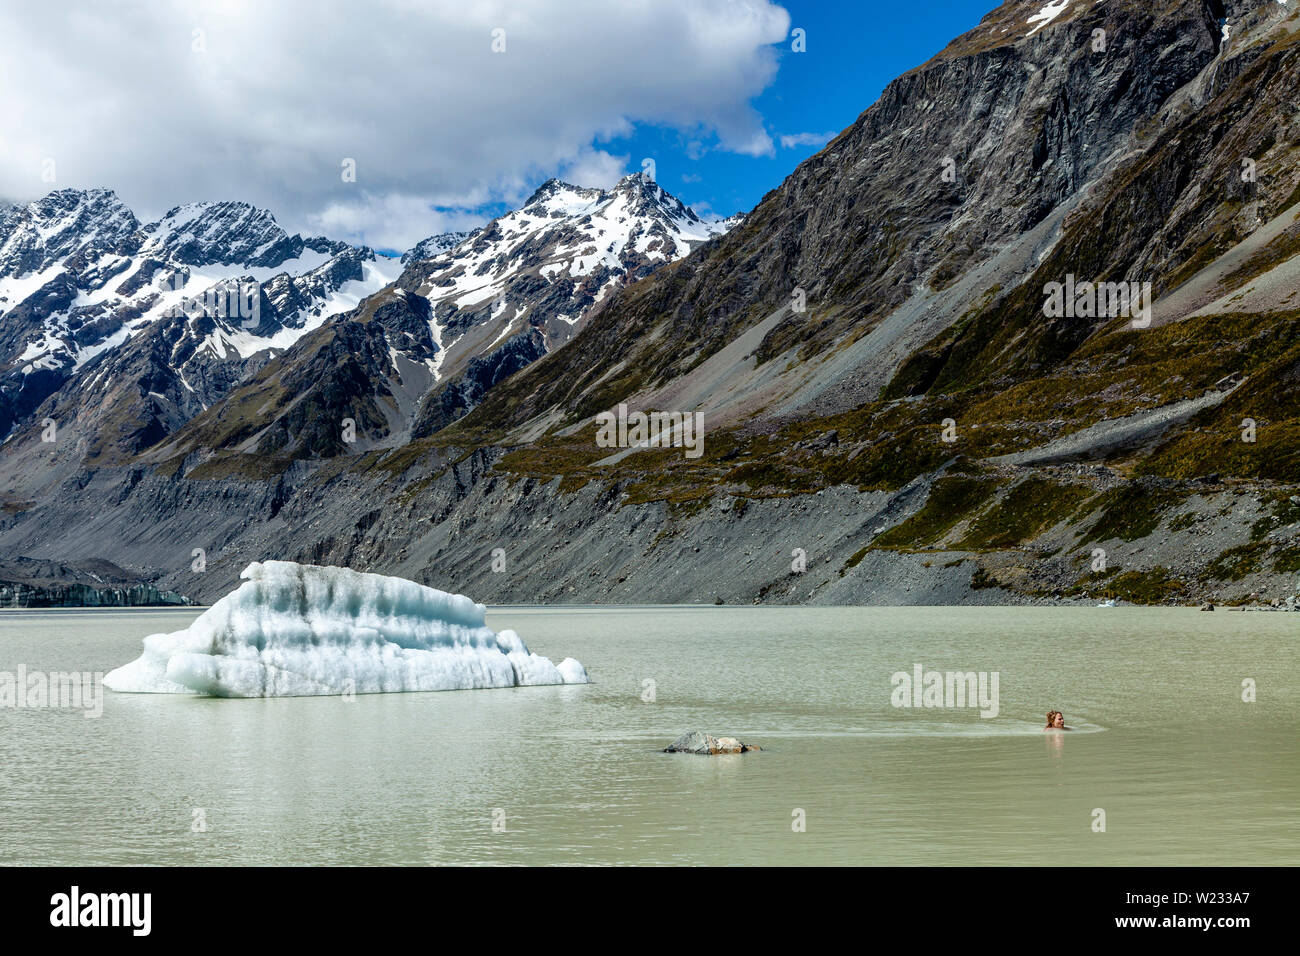 A Tourist Swimming In The Glacial Hooker Lake At The End Of The Hooker Valley Track, Aoraki/Mt Cook National Park, South Island, New Zealand Stock Photo